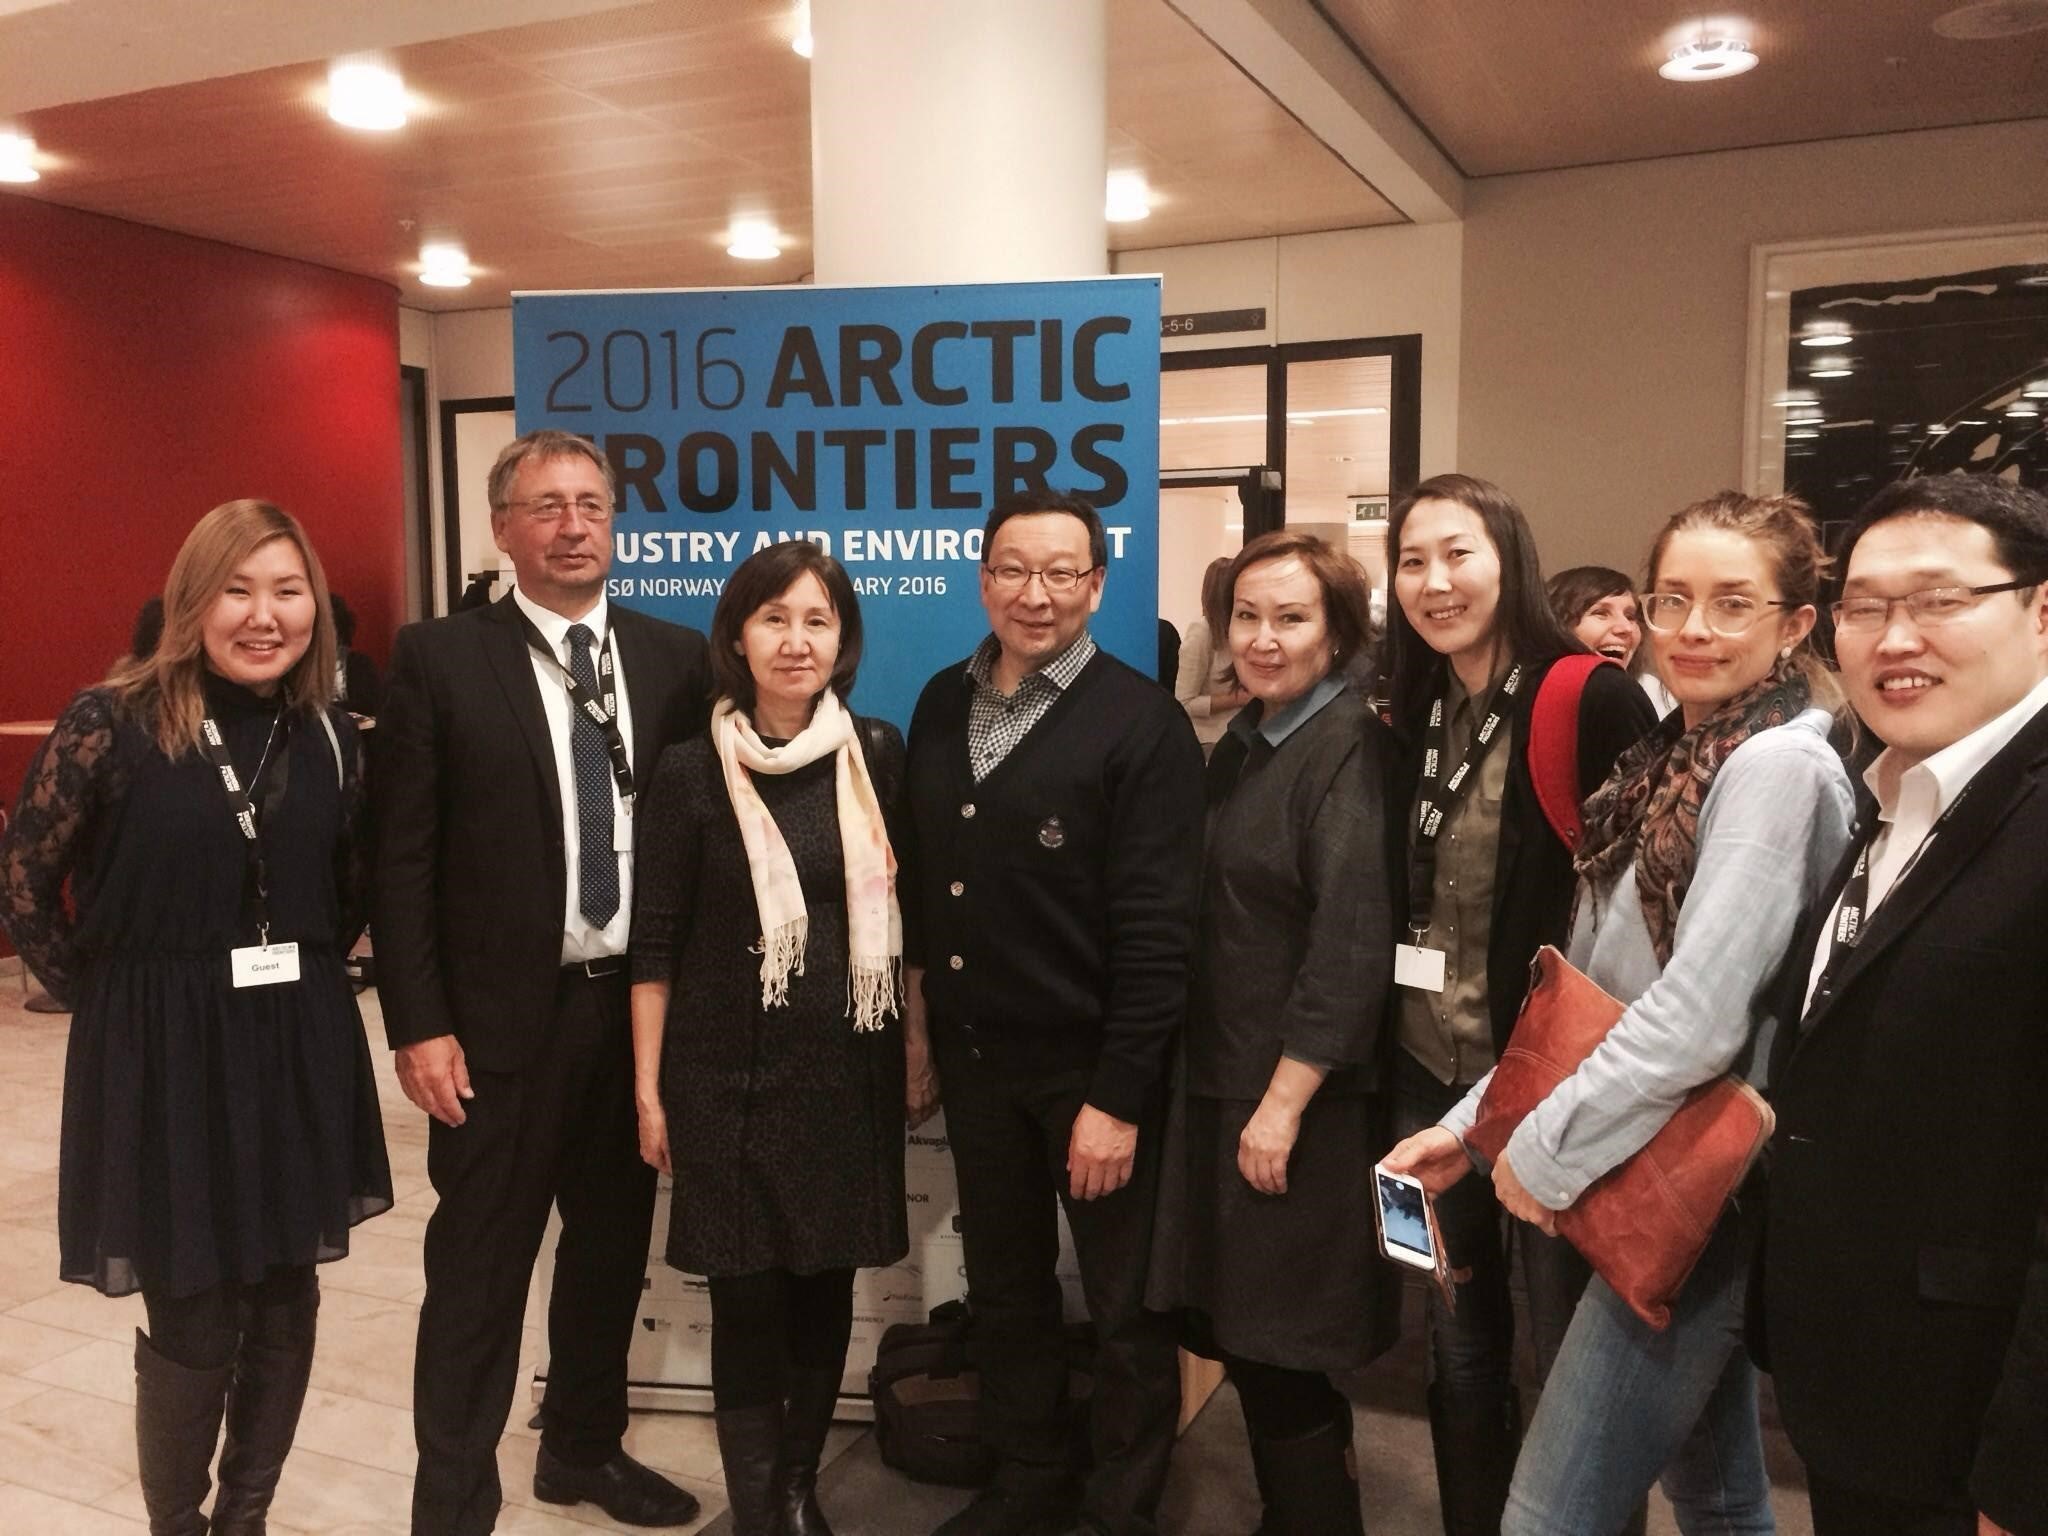 At the Arctic Frontiers